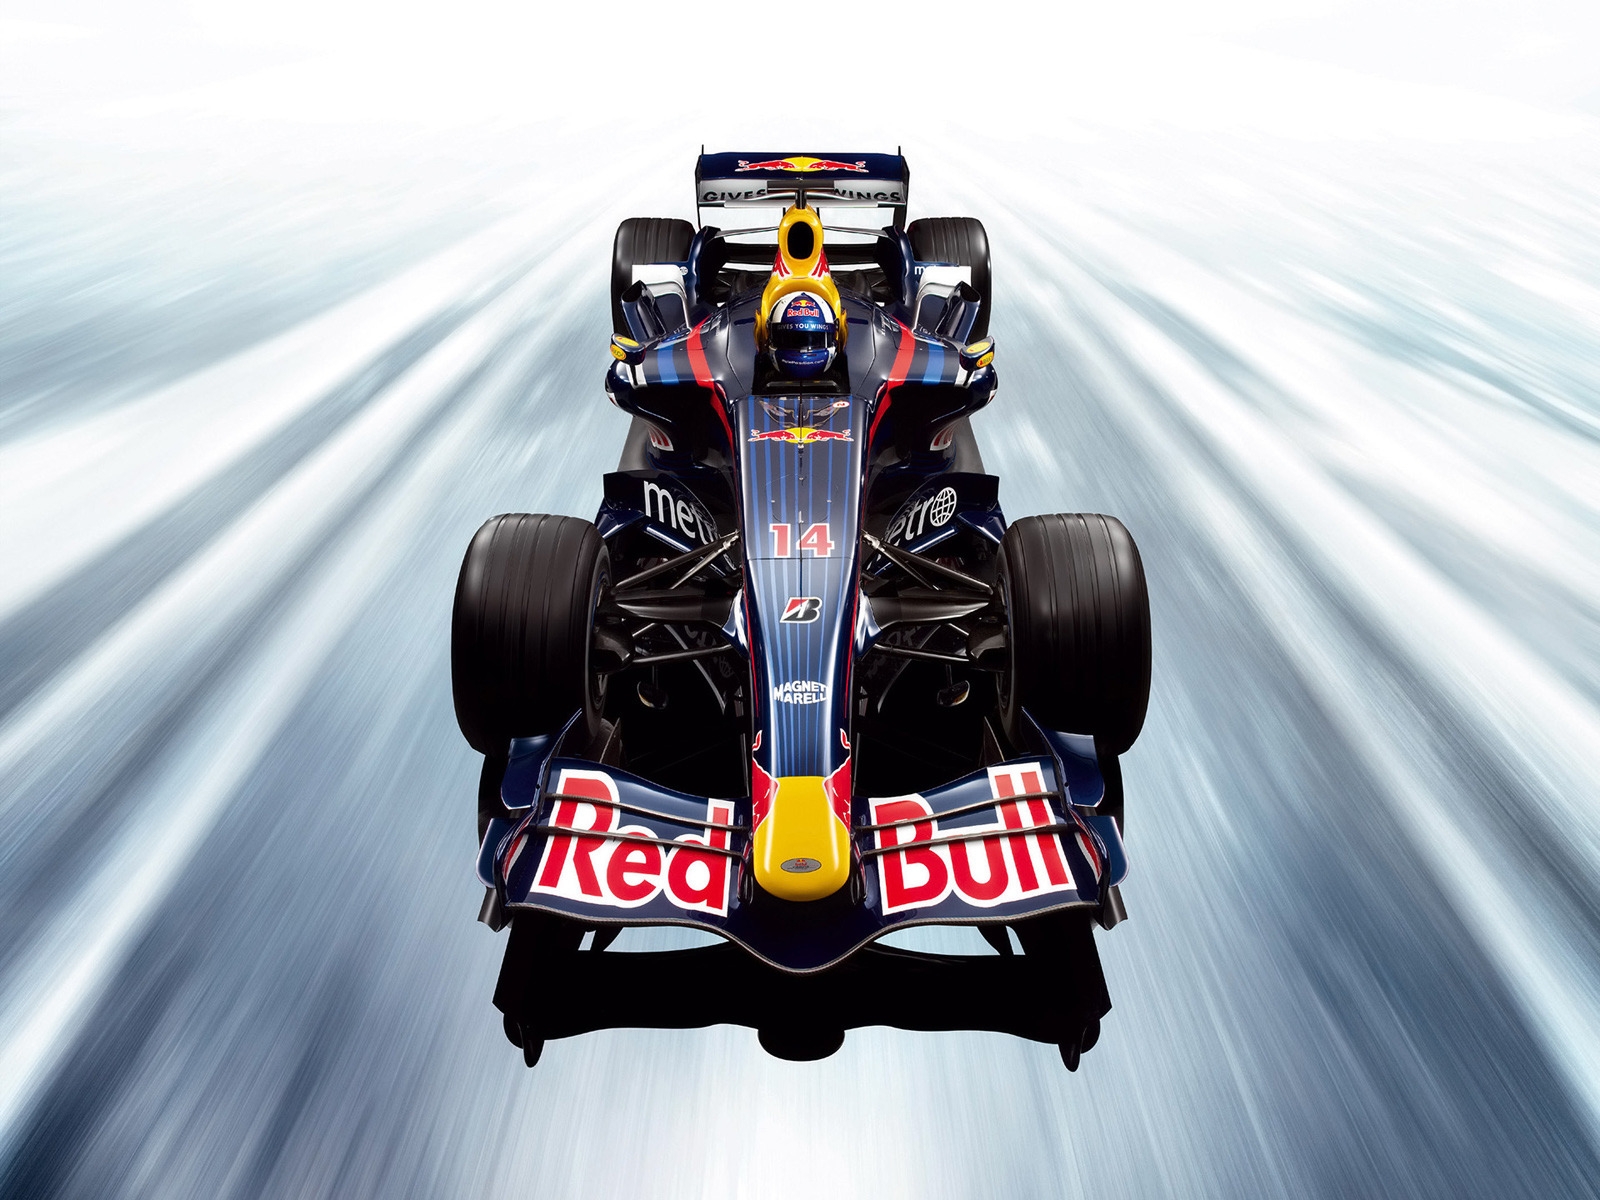 Red Bull RB3 F1 Studio Front for 1600 x 1200 resolution